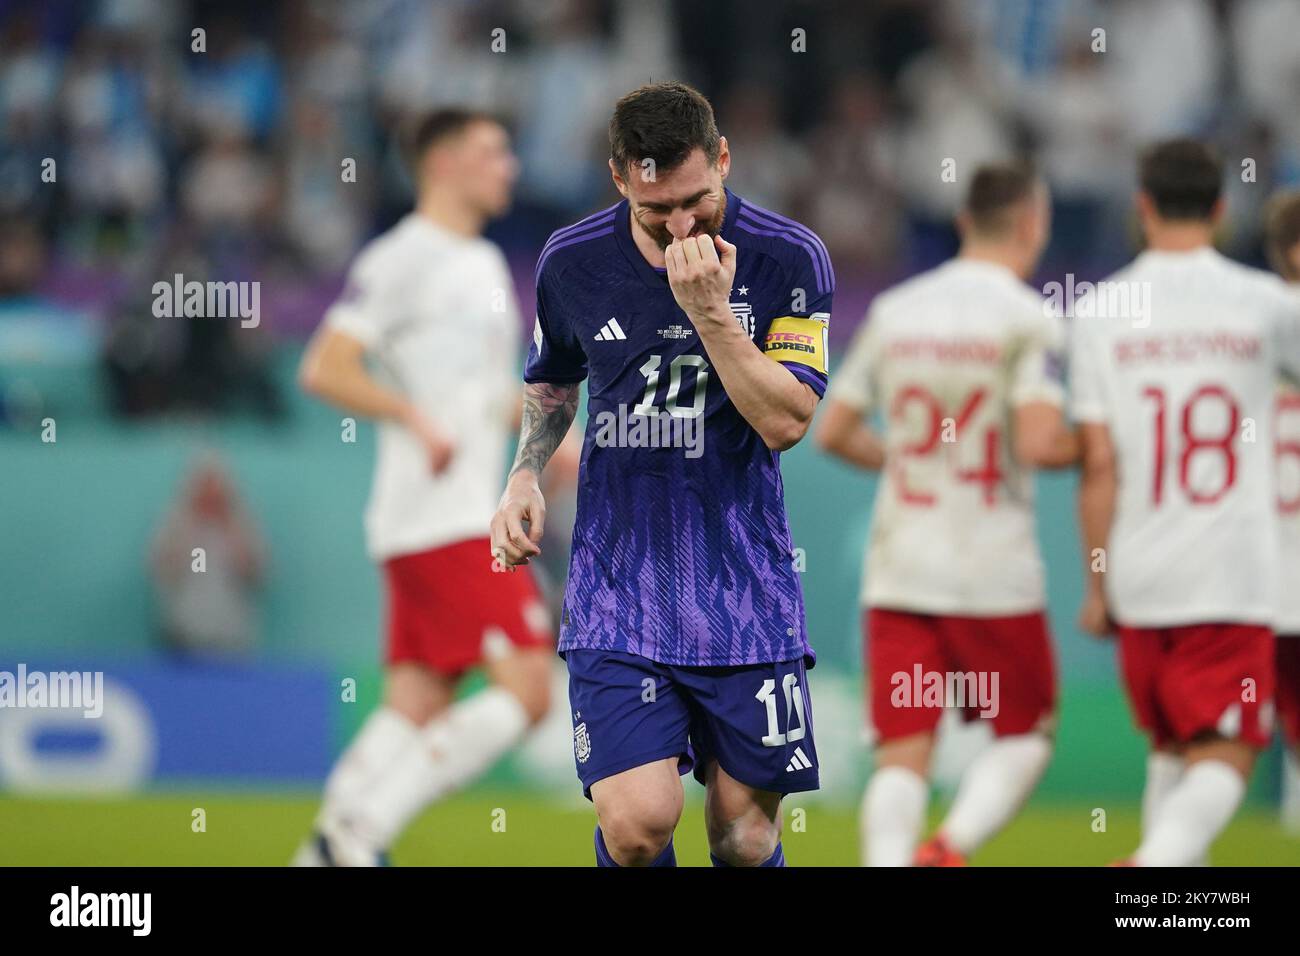 DOHA, QATAR - NOVEMBER 30: Player of Argentina Lionel Messi reacts during the FIFA World Cup Qatar 2022 group C match between Argentina and Poland at Stadium 974 on November 30, 2022 in Doha, Qatar. (Photo by Florencia Tan Jun/PxImages) Credit: Px Images/Alamy Live News Stock Photo